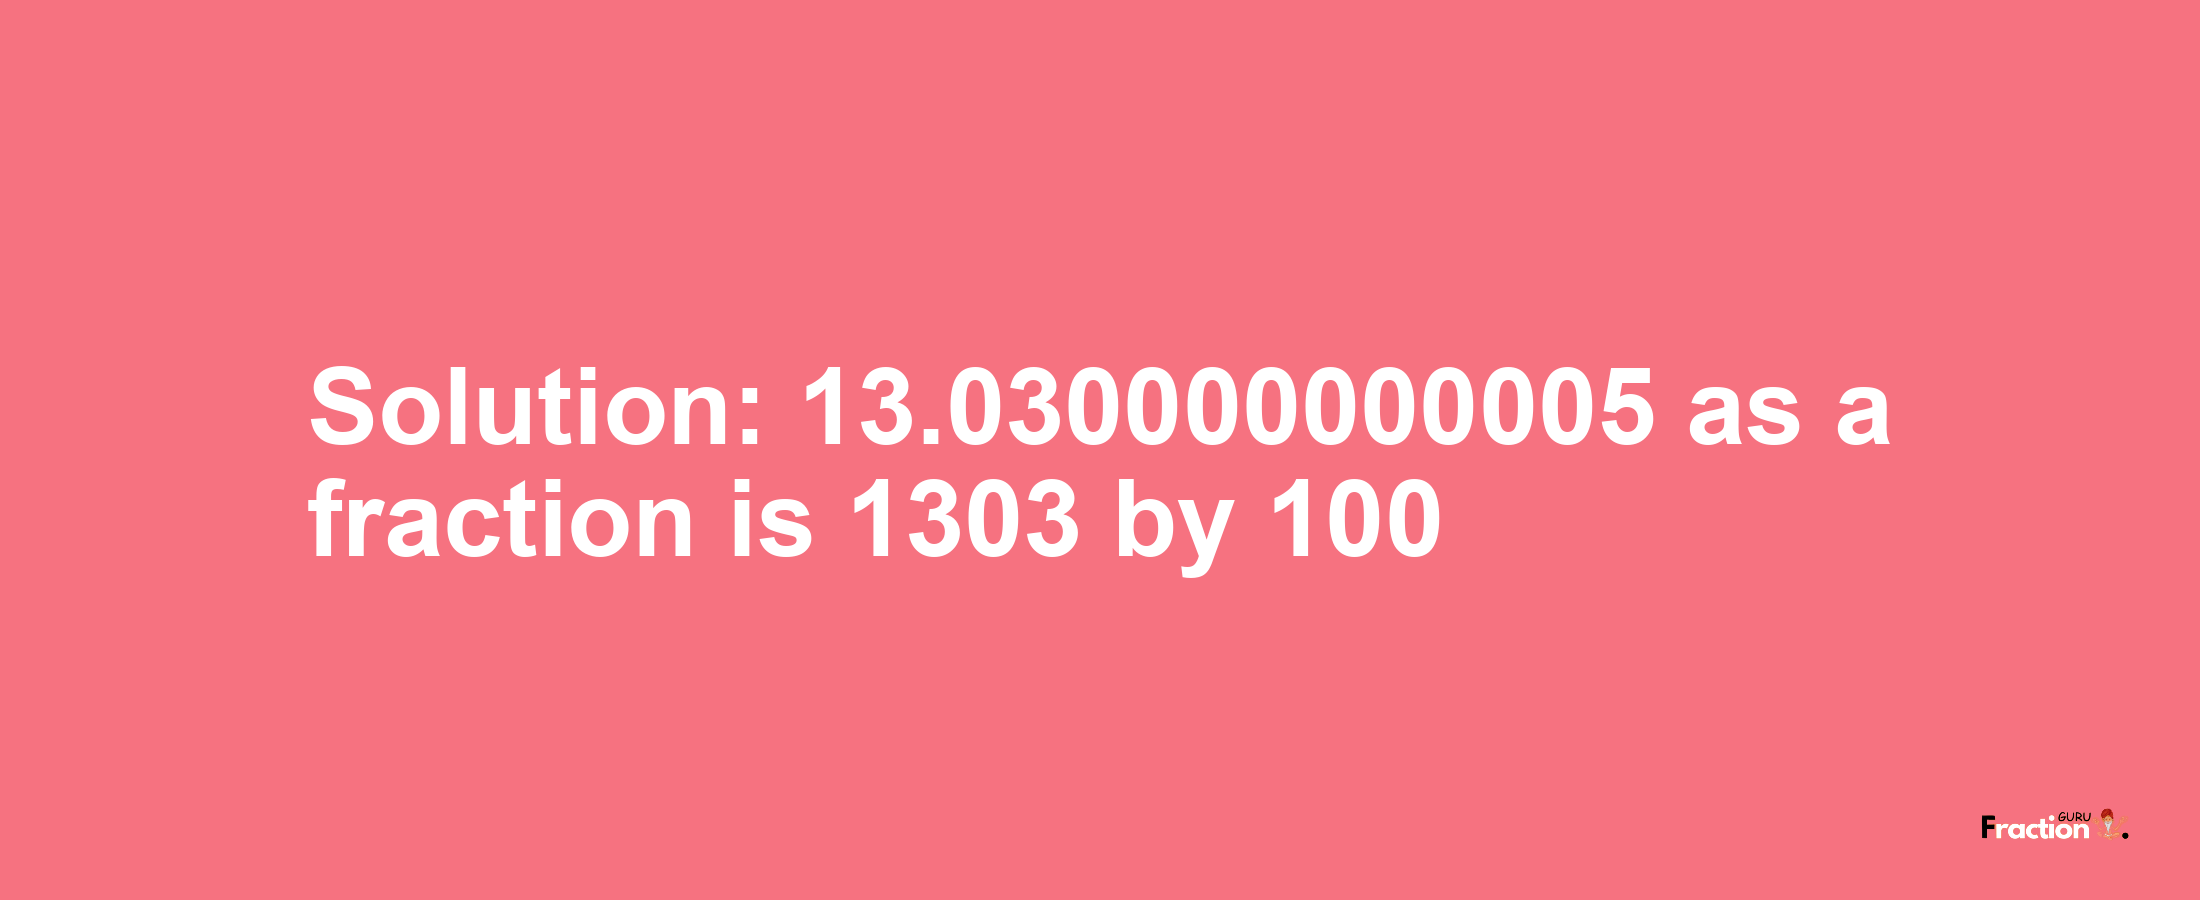 Solution:13.030000000005 as a fraction is 1303/100